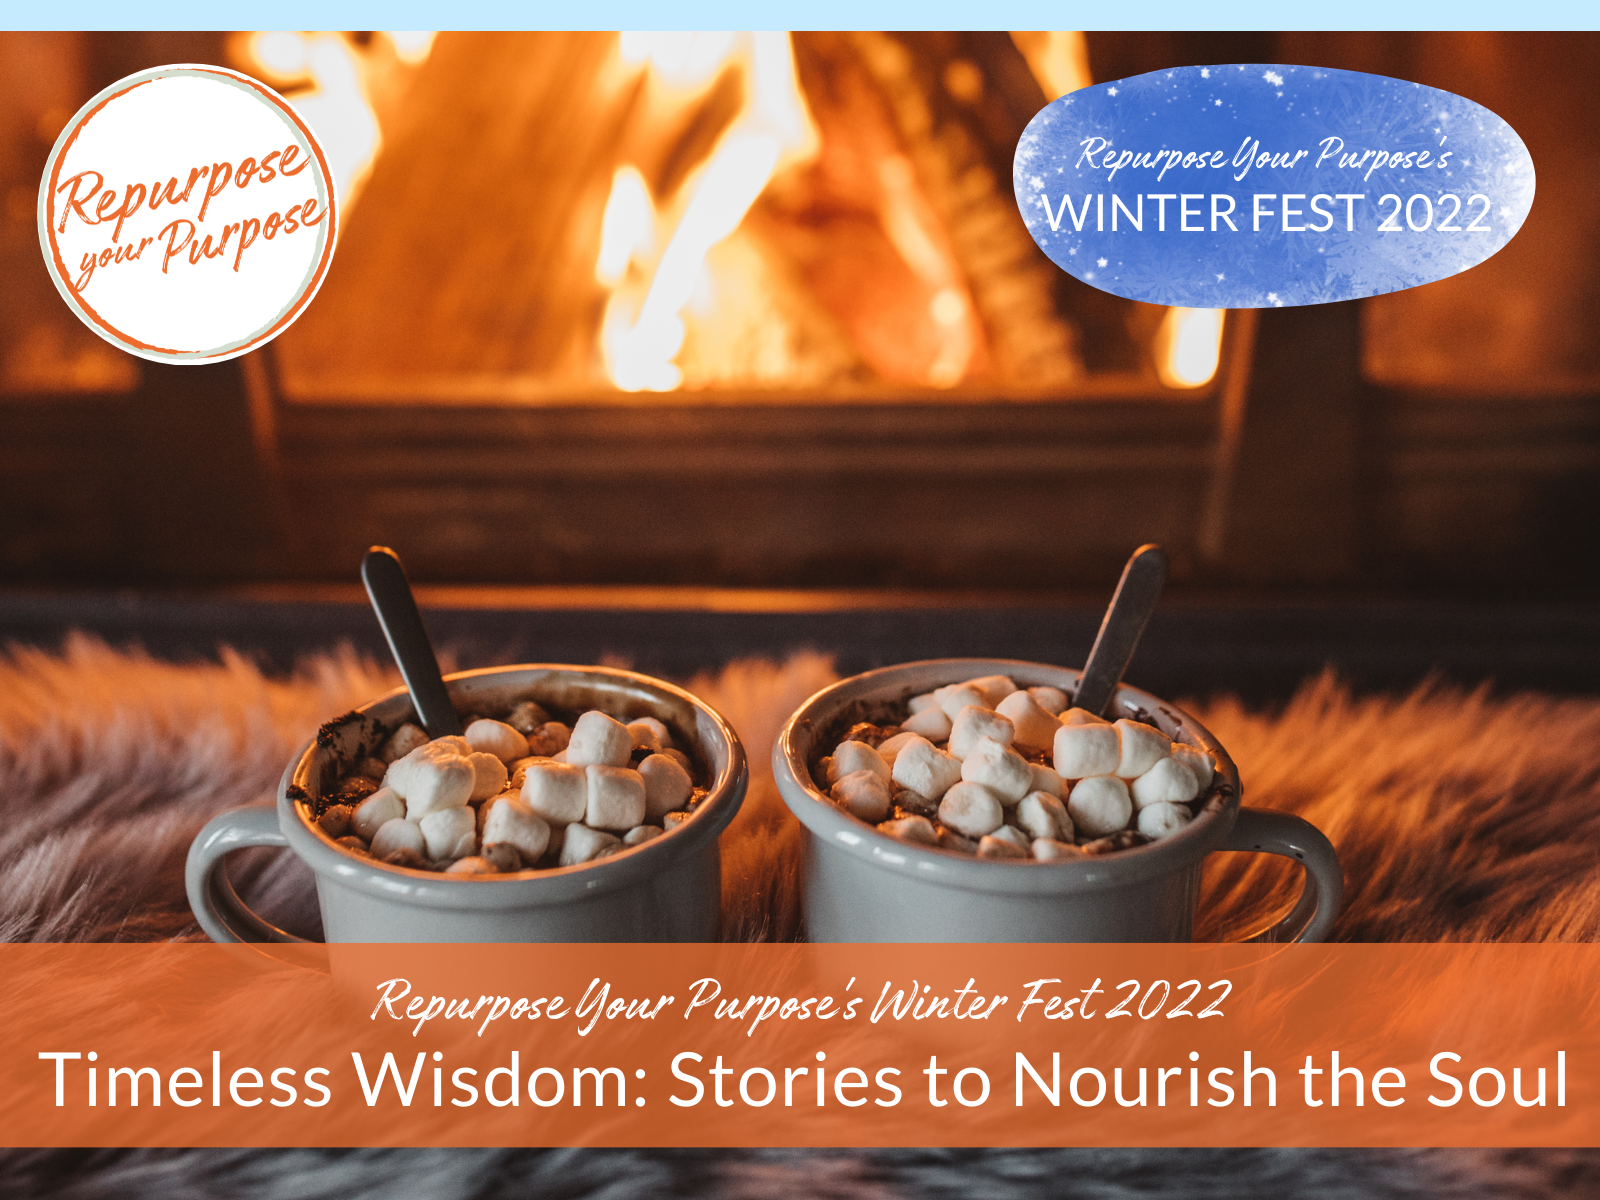 Timeless Wisdom: Stories to Nourish the Soul (Winter Fest 2022)